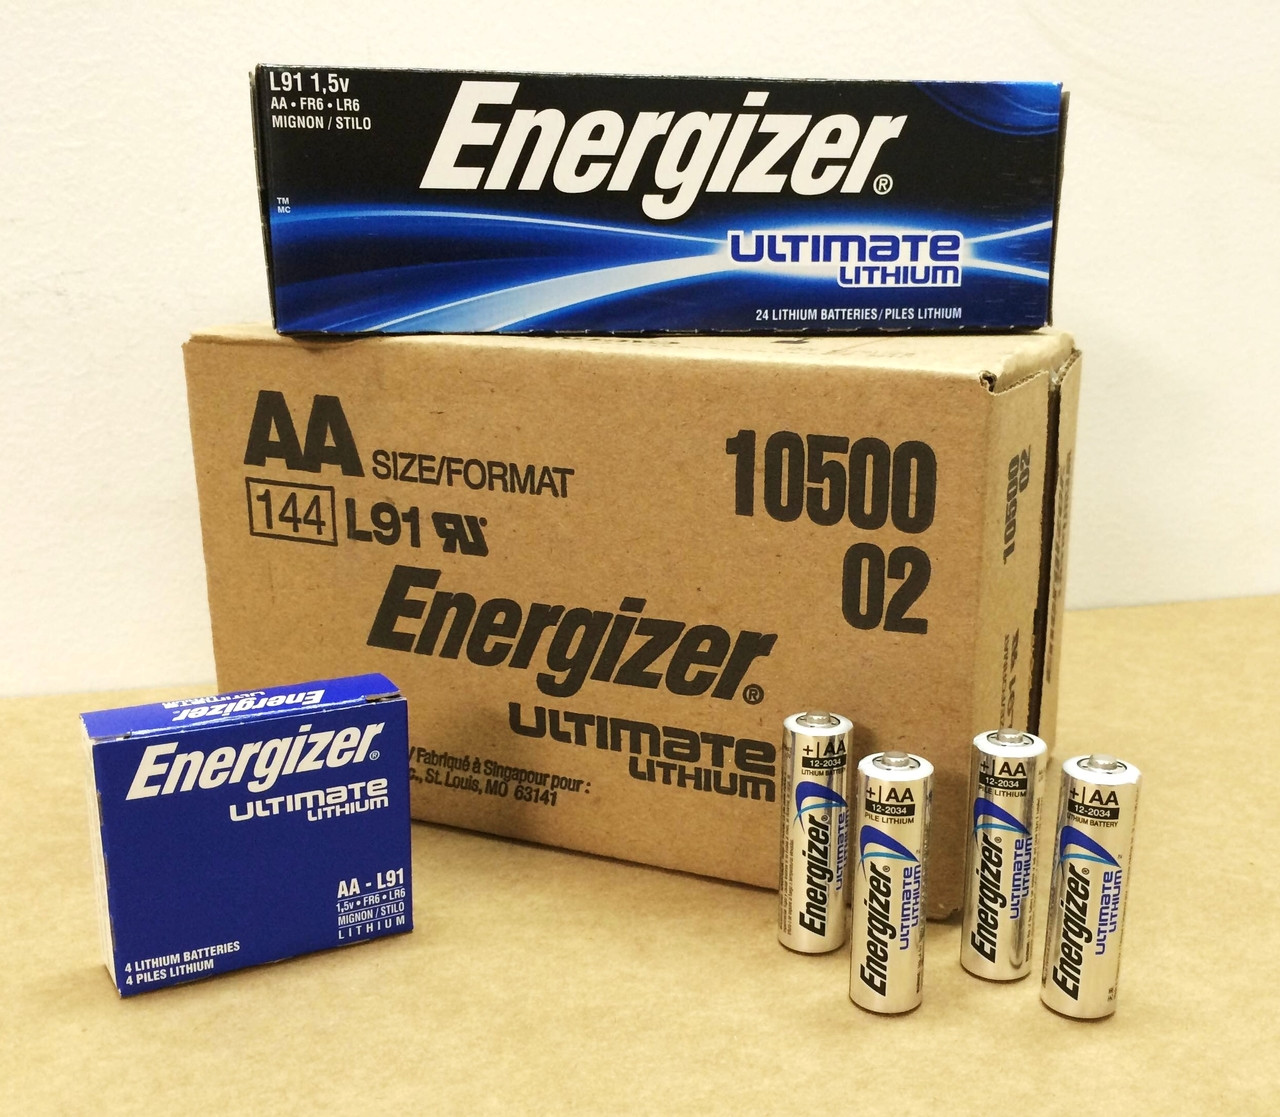  Energizer Ultimate Lithium AA Size Batteries - 20 Pack